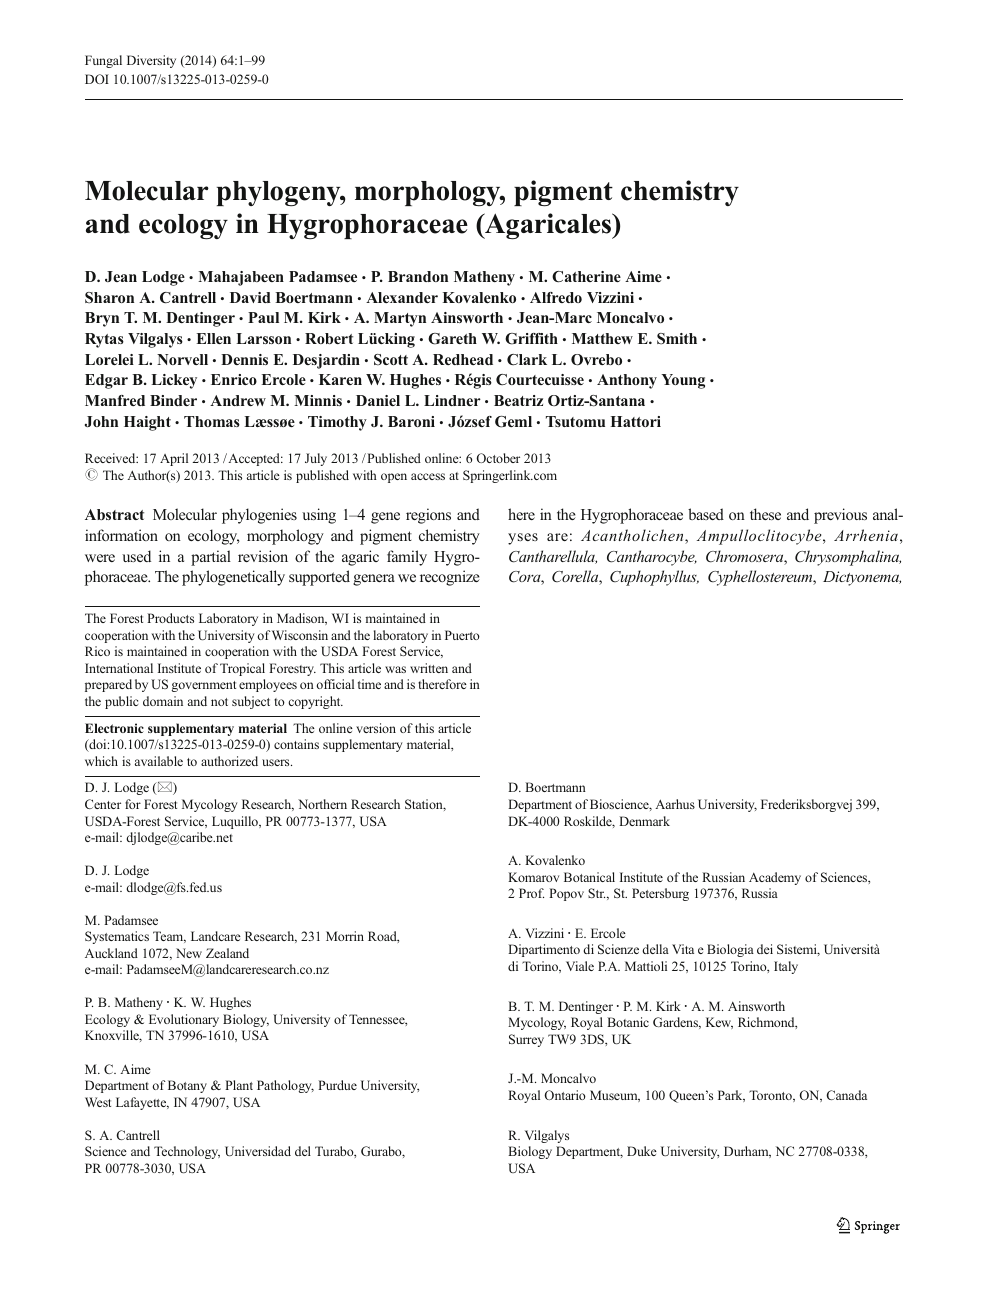 Molecular Phylogeny Morphology Pigment Chemistry And Ecology In Hygrophoraceae Agaricales Topic Of Research Paper In Biological Sciences Download Scholarly Article Pdf And Read For Free On Cyberleninka Open Science Hub